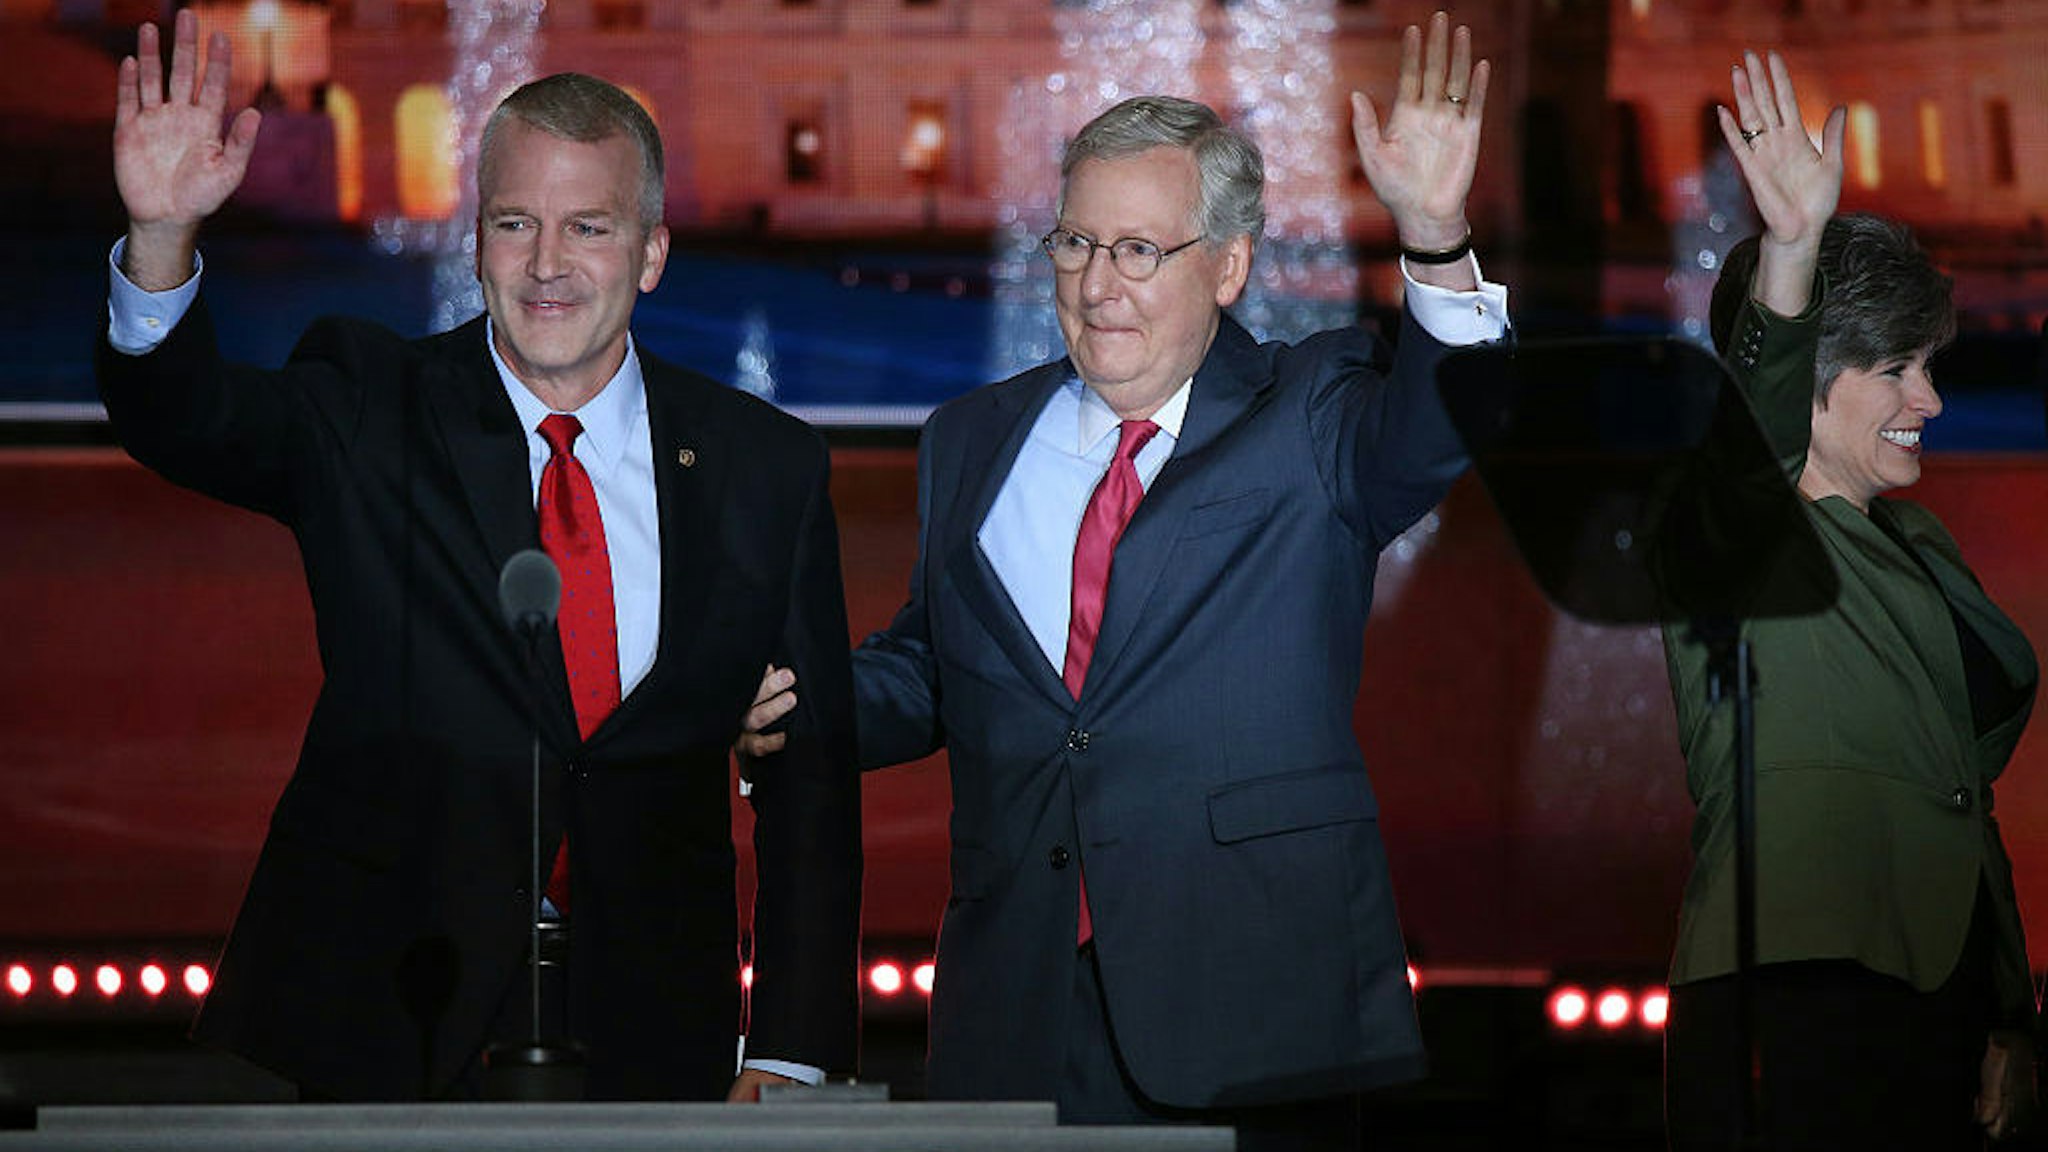 Senator Dan Sullivan, a Republican from Alaska, from left, waves on stage with Senate Majority Leader Mitch McConnell, a Republican from Kentucky, and Senator Joni Ernst, a Republican from Iowa, during the Republican National Convention (RNC) in Cleveland, Ohio, U.S., on Tuesday, July 19, 2016. Donald Trump sought to use a speech by his wife to move beyond delegate discontent at the Republican National Convention, only to have the second day open with an onslaught of accusations that his wife's speech lifted phrases from one delivered by Michelle Obama in 2008. Photographer: John Taggart/Bloomberg